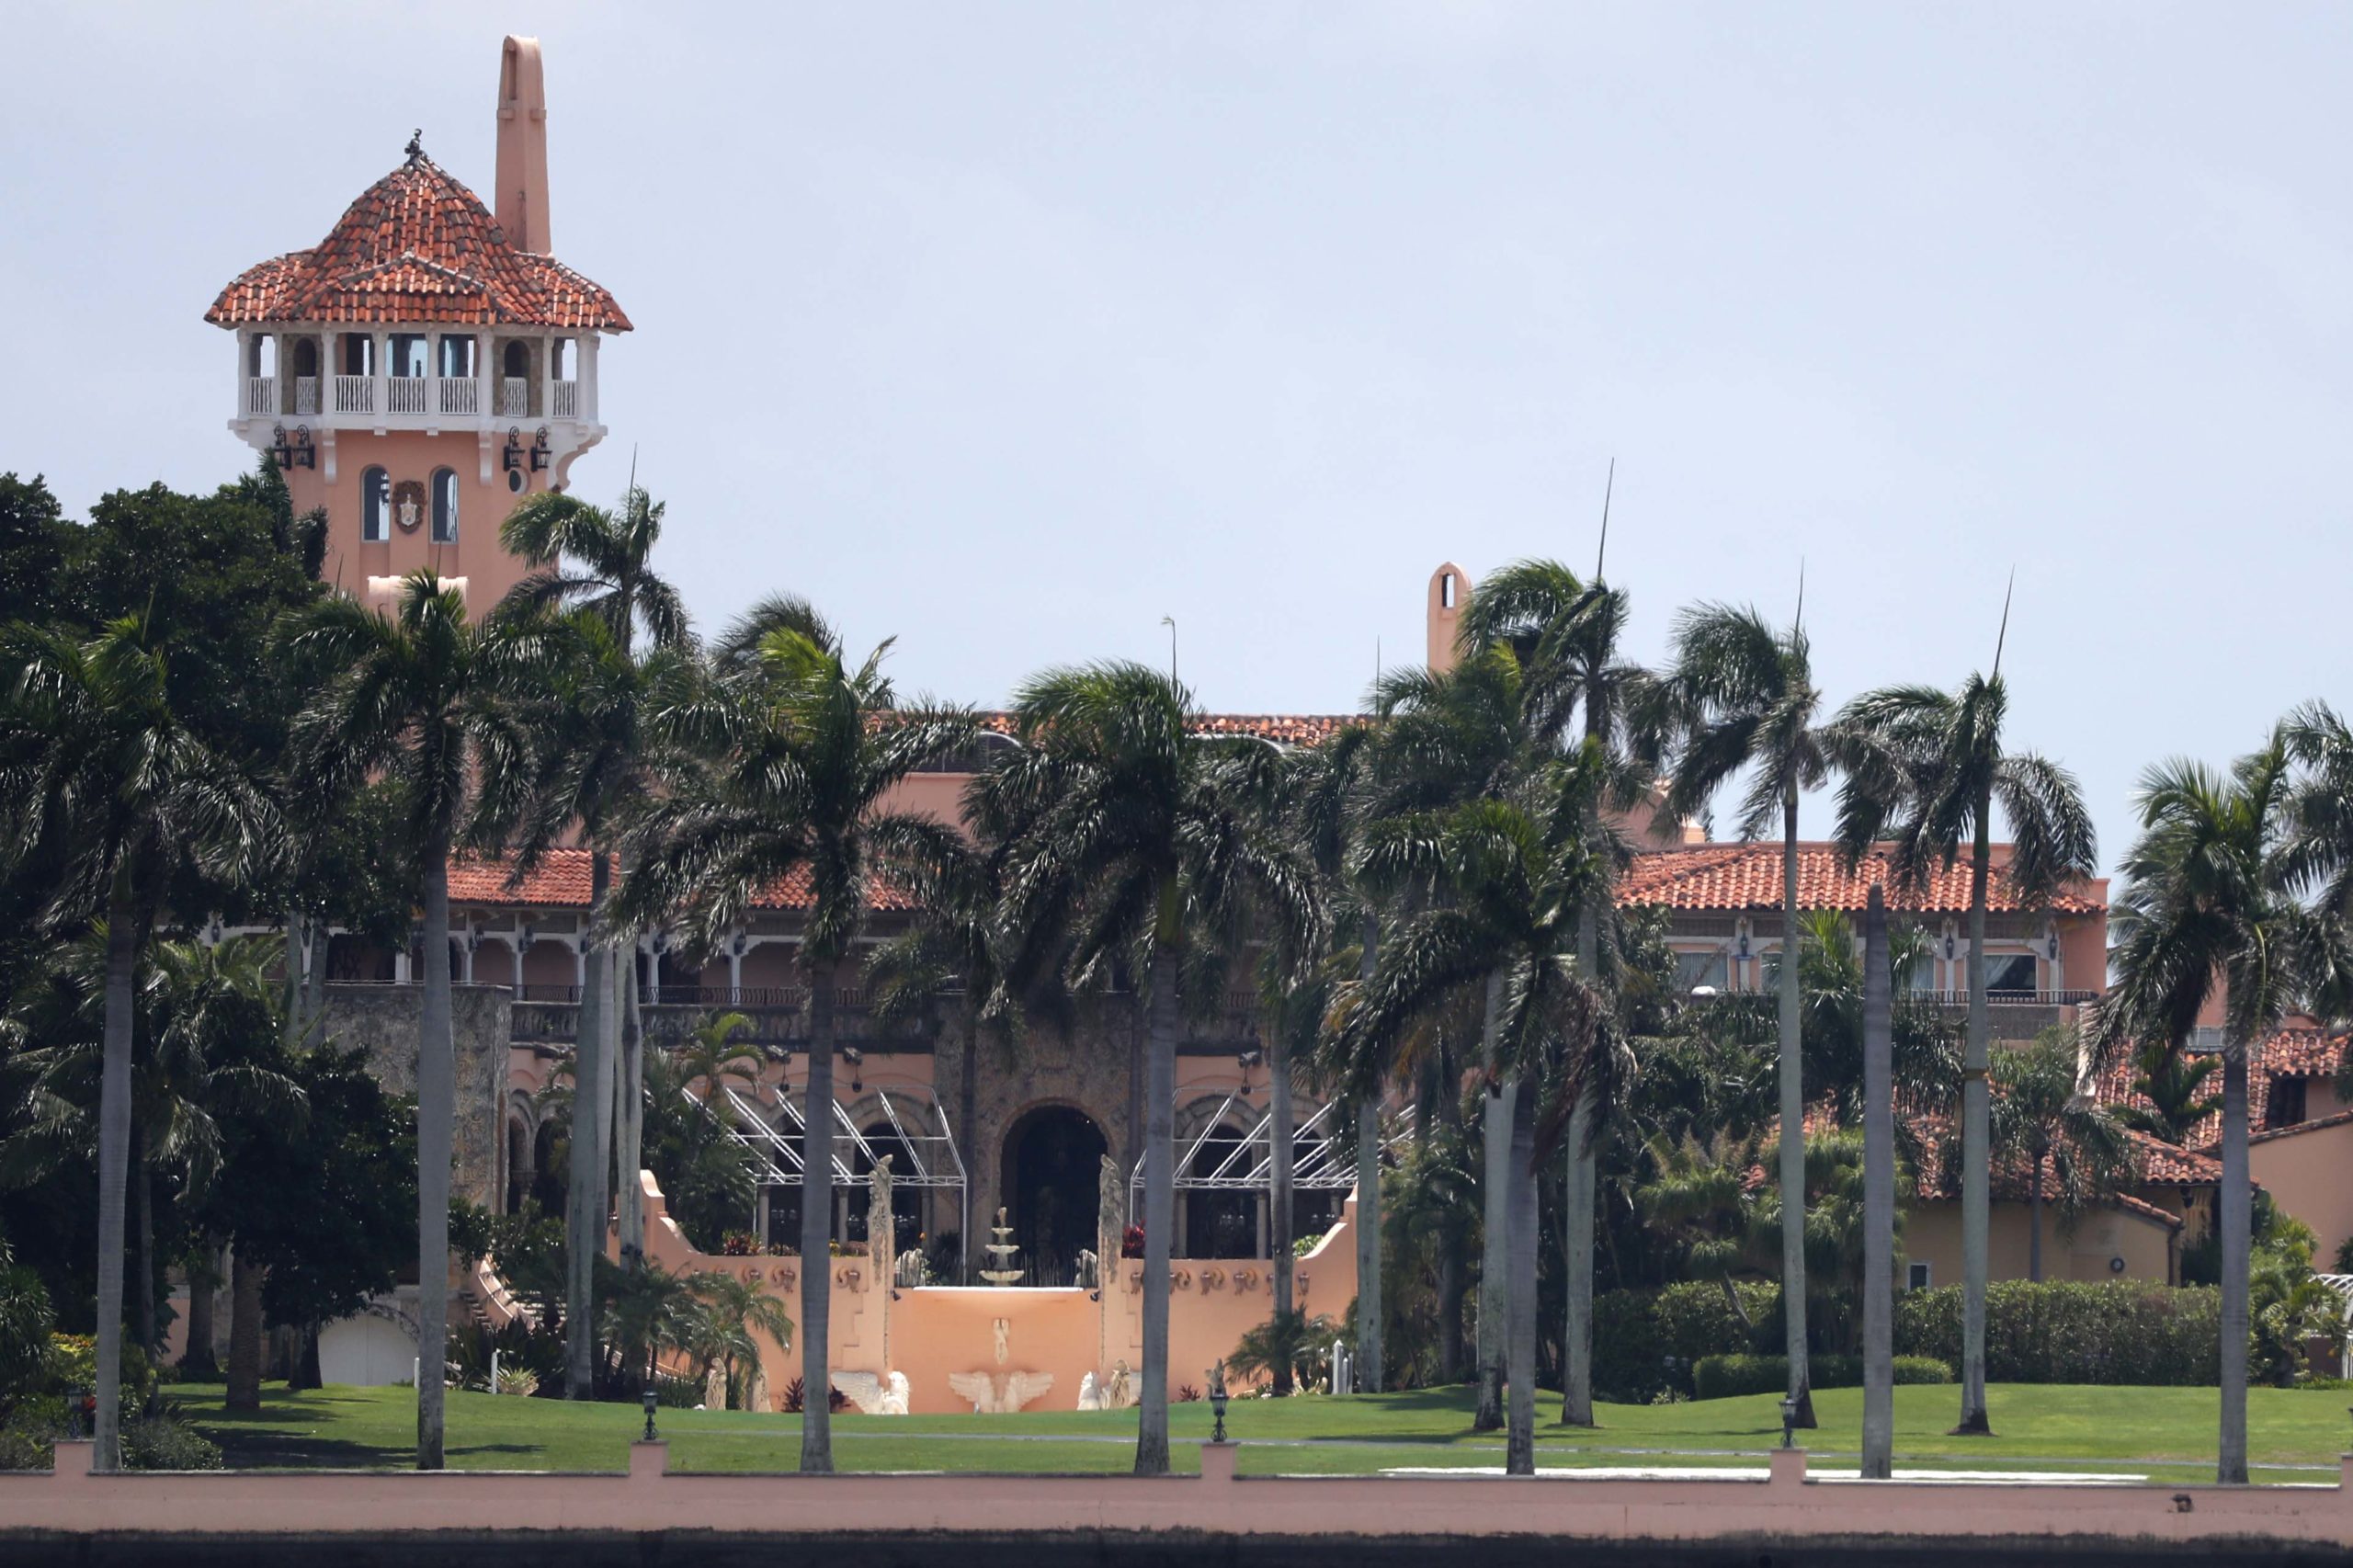 SUV breaches Mar-a-lago safety; 2 in custody after chase